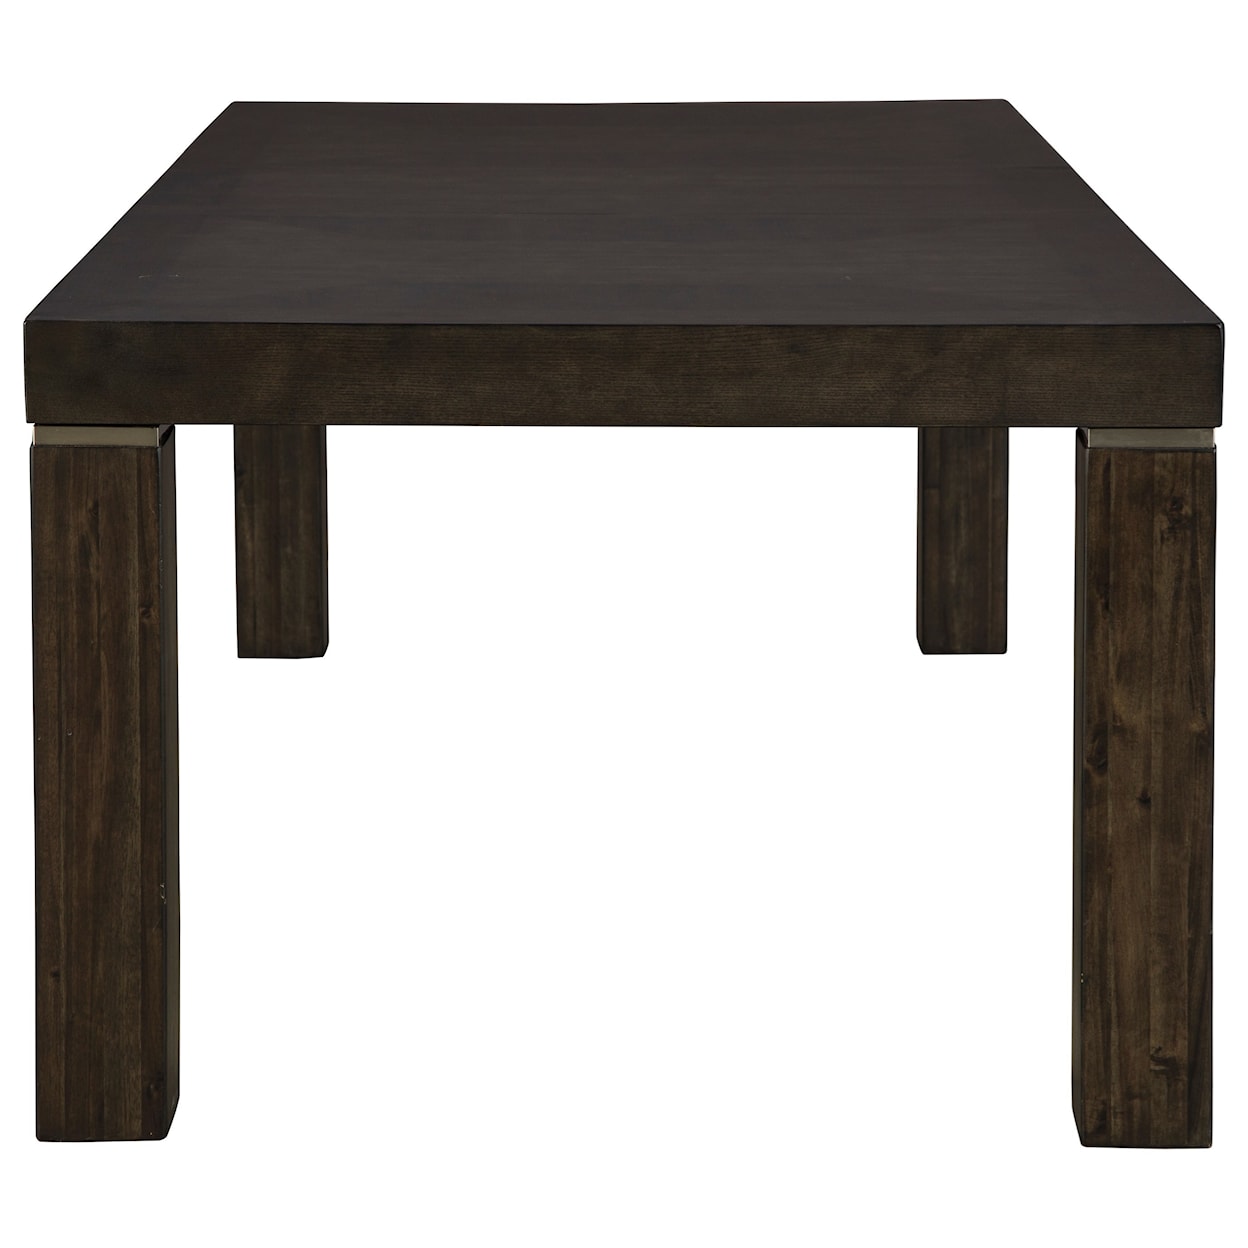 Michael Alan Select Hyndell Rectangular Dining Room Extension Table